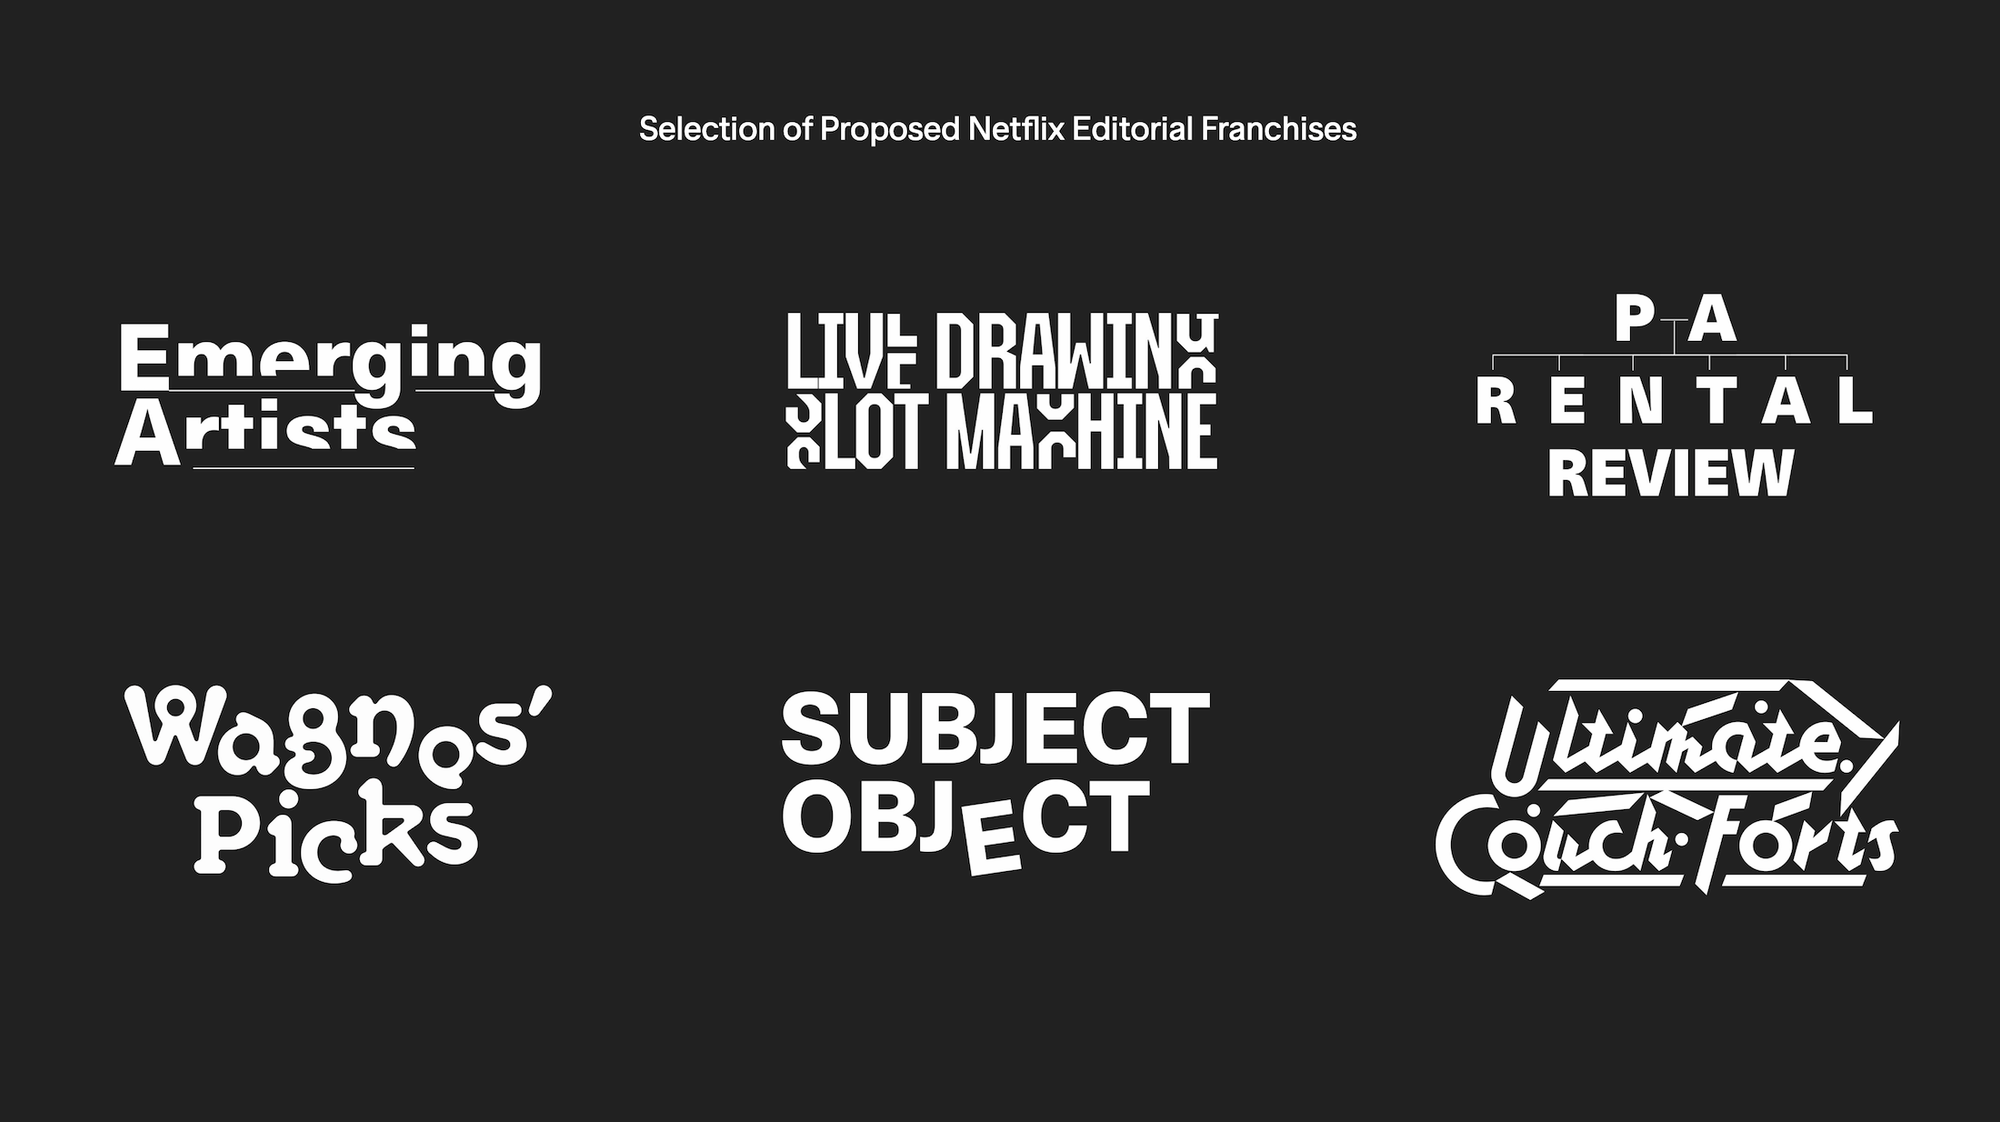 Netflix Films: Selection of Proposed Editorial Franchises